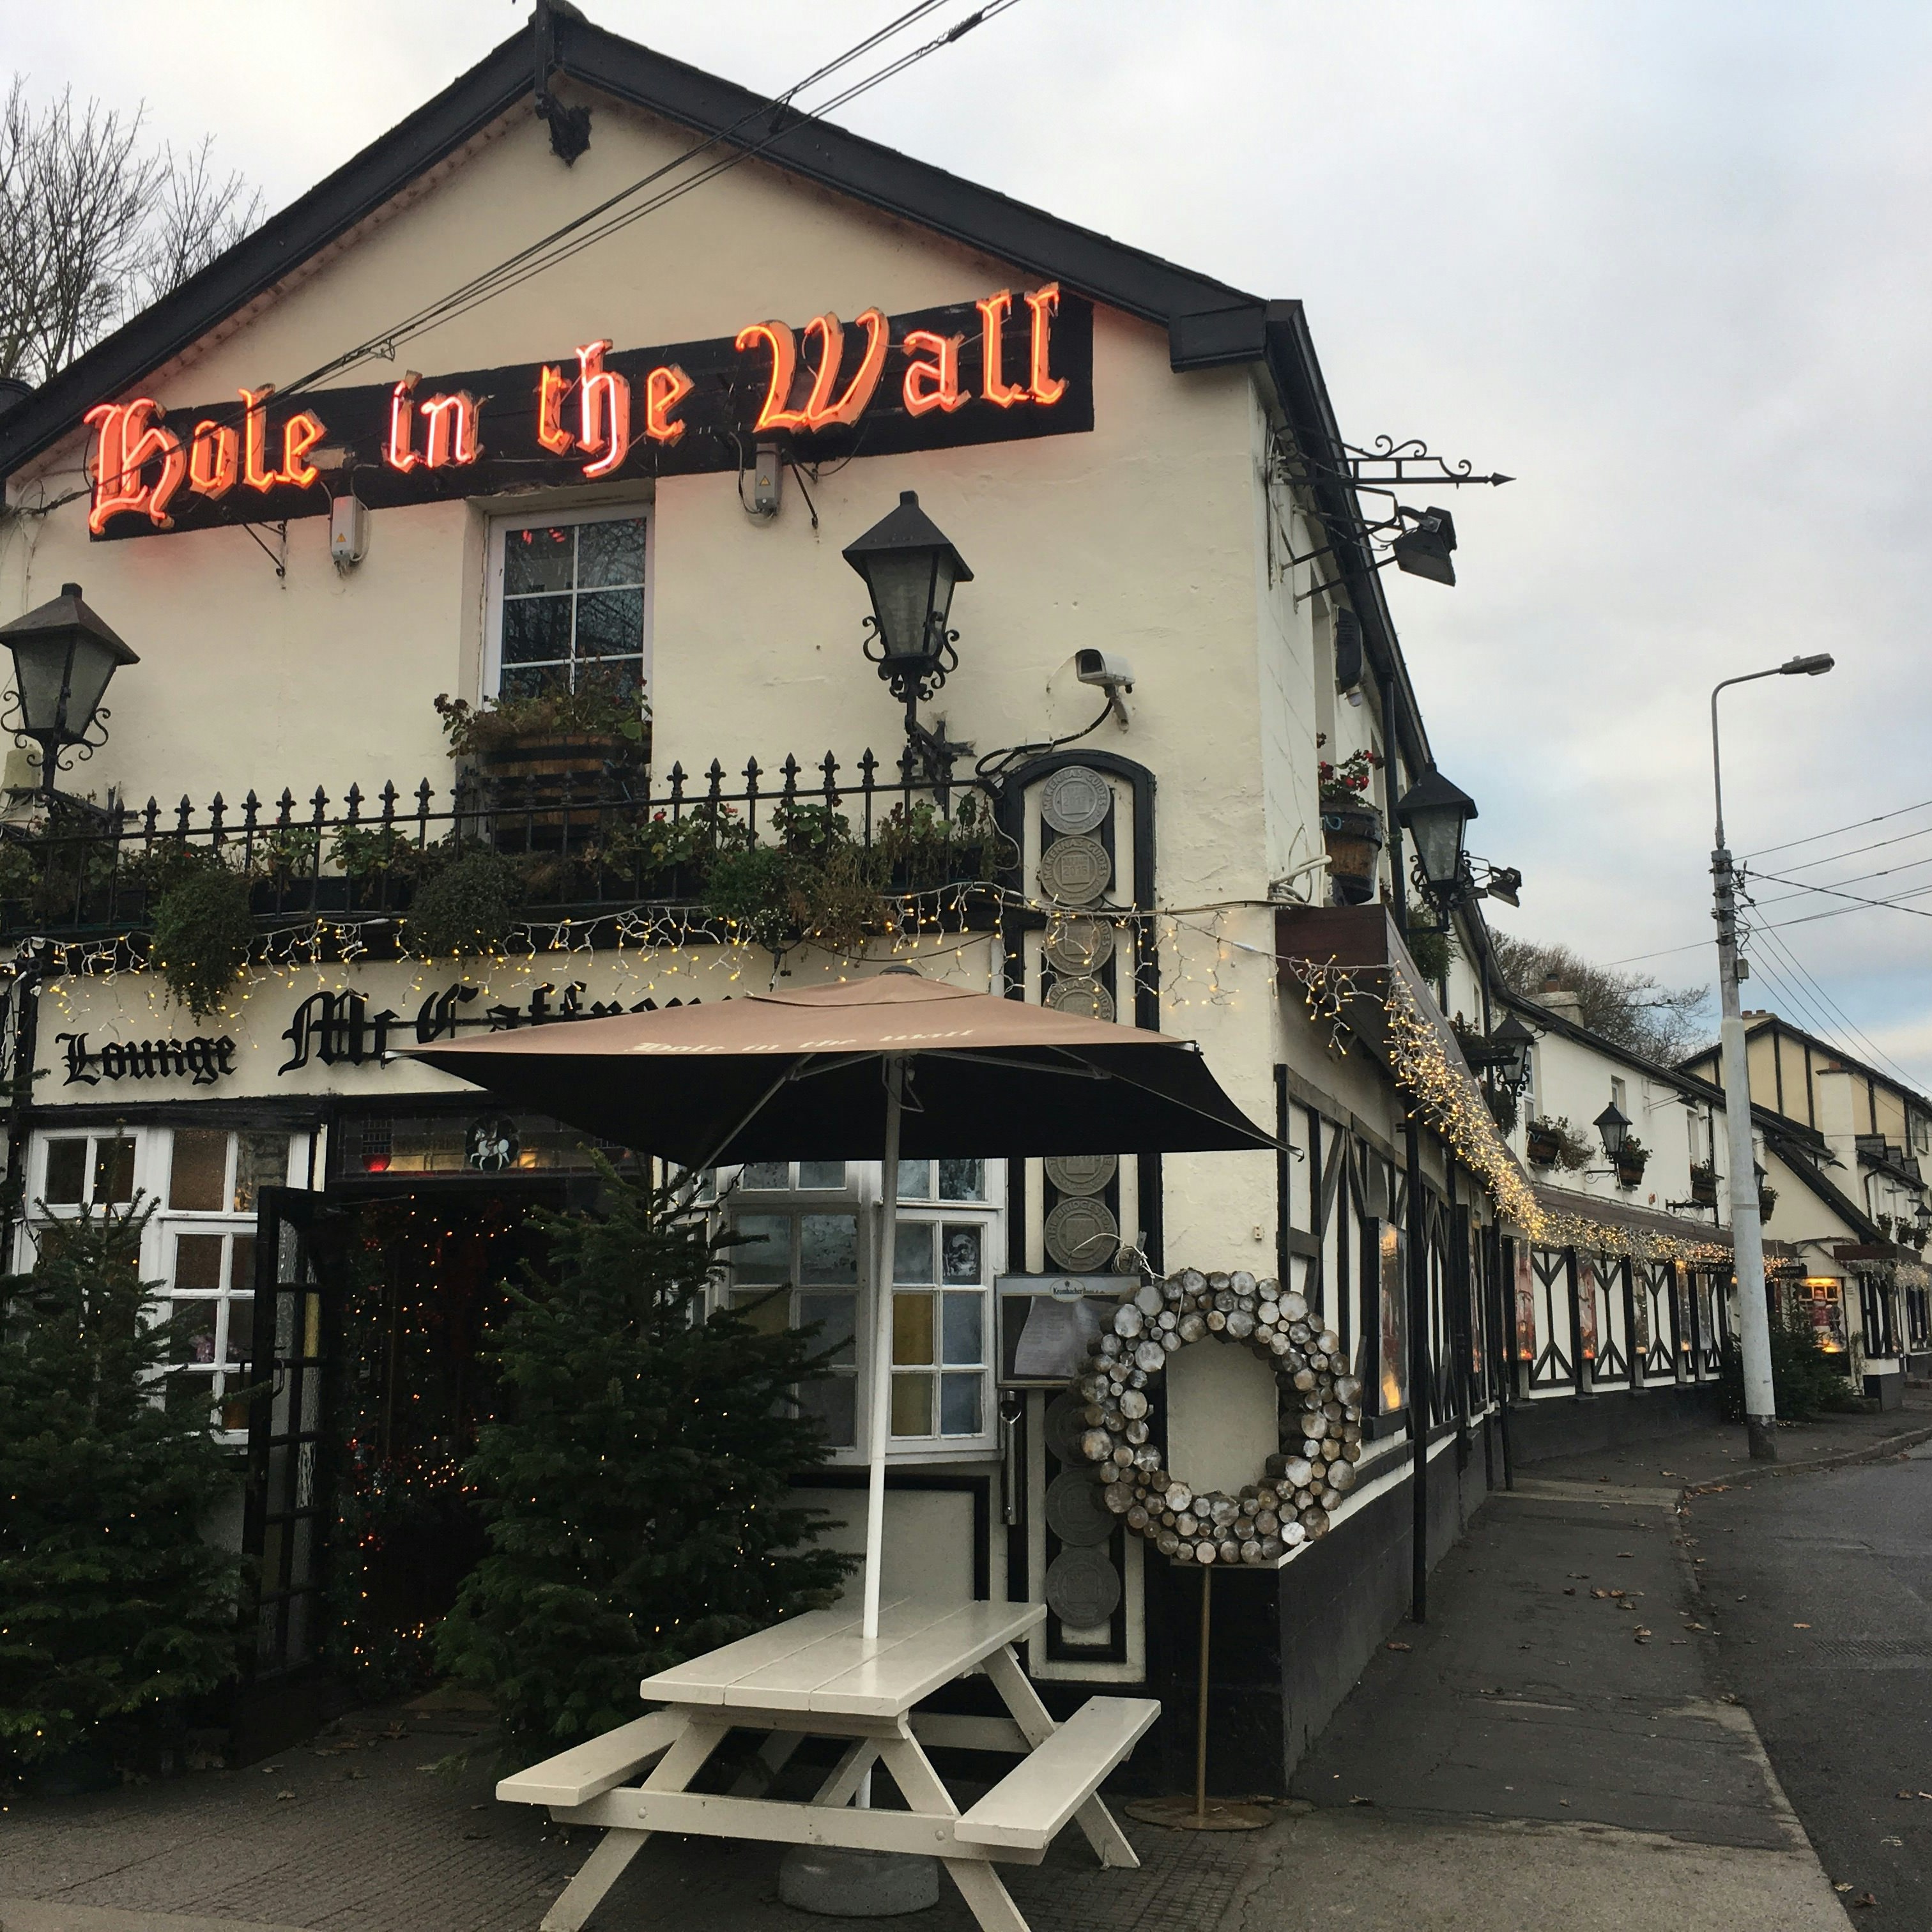 Exterior shot of Hole in the Wall pub